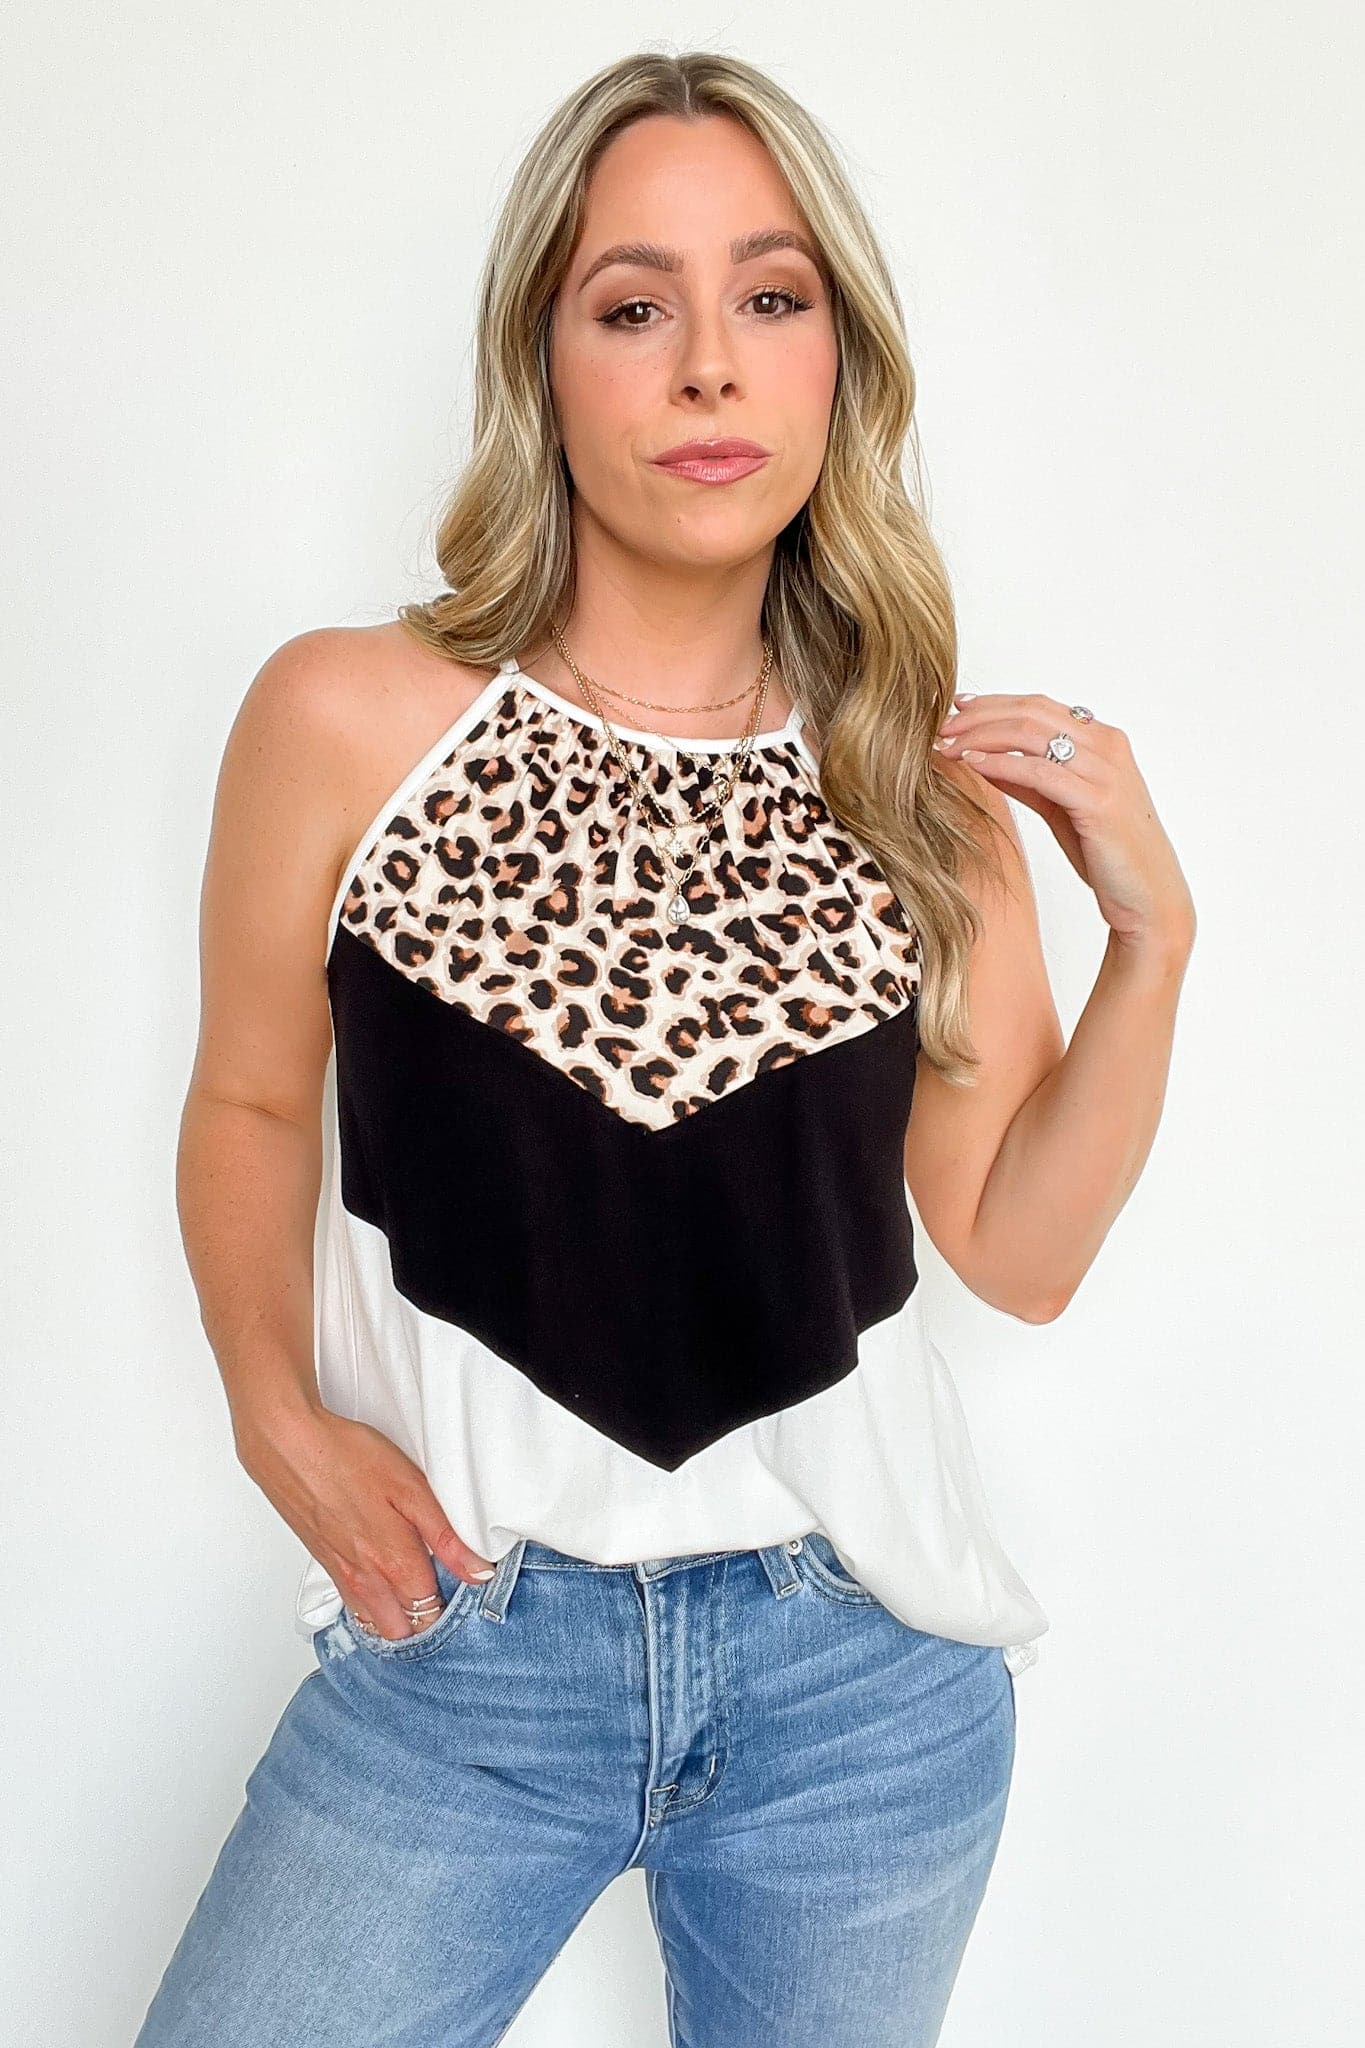  Convery Animal Print Color Block Tank Top - FINAL SALE - Madison and Mallory